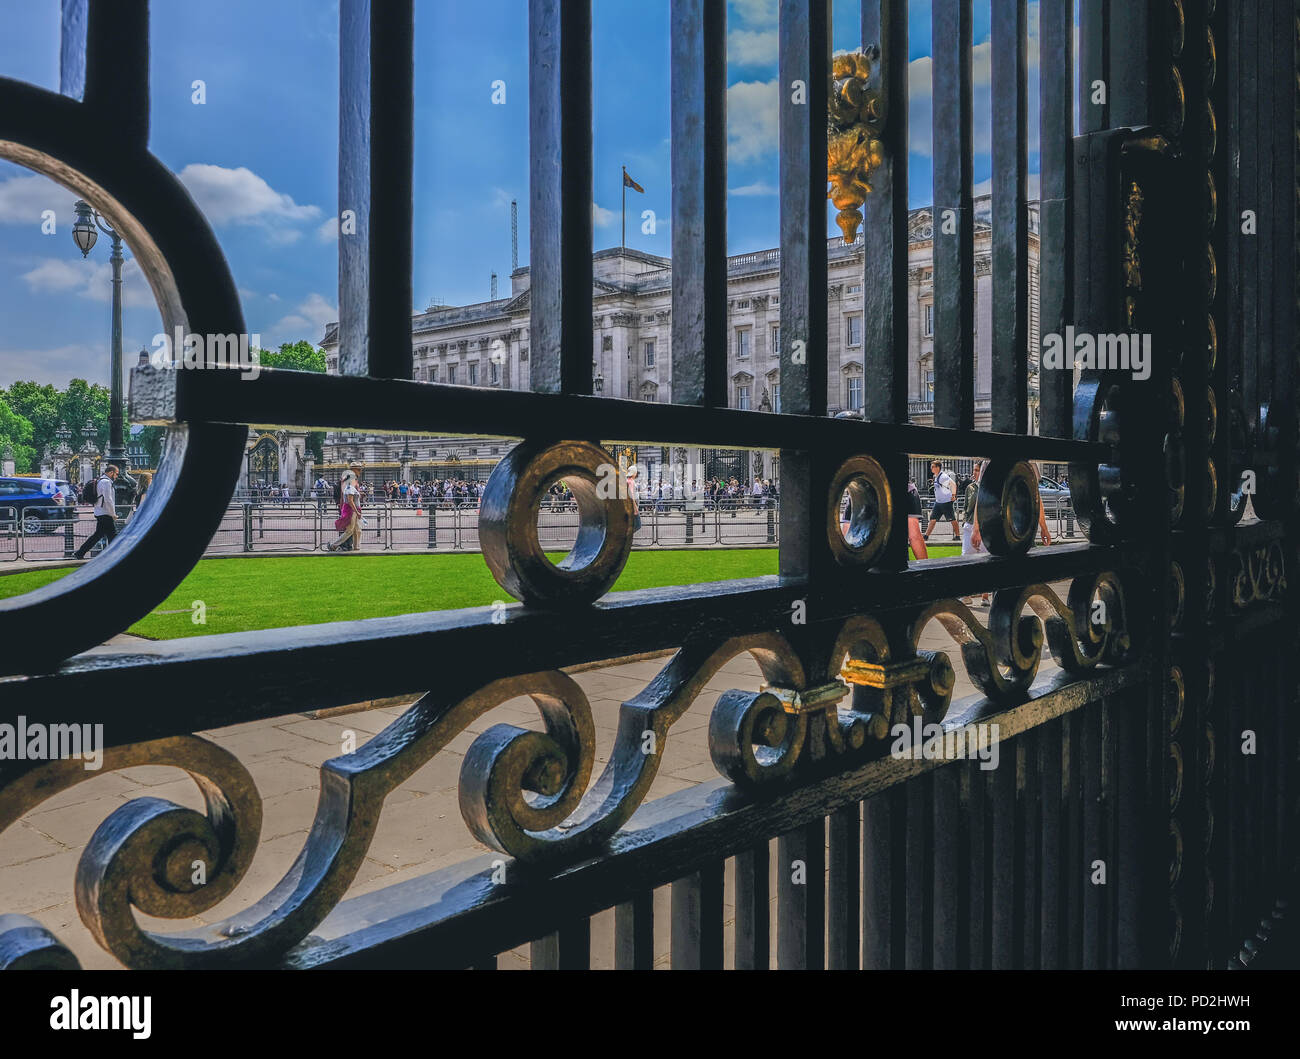 London, UK - June 8, 2018: Front view of Buckingham Palace from behind the black ornate South African Gates.  Taken on a bright sunny blue sky day. Stock Photo